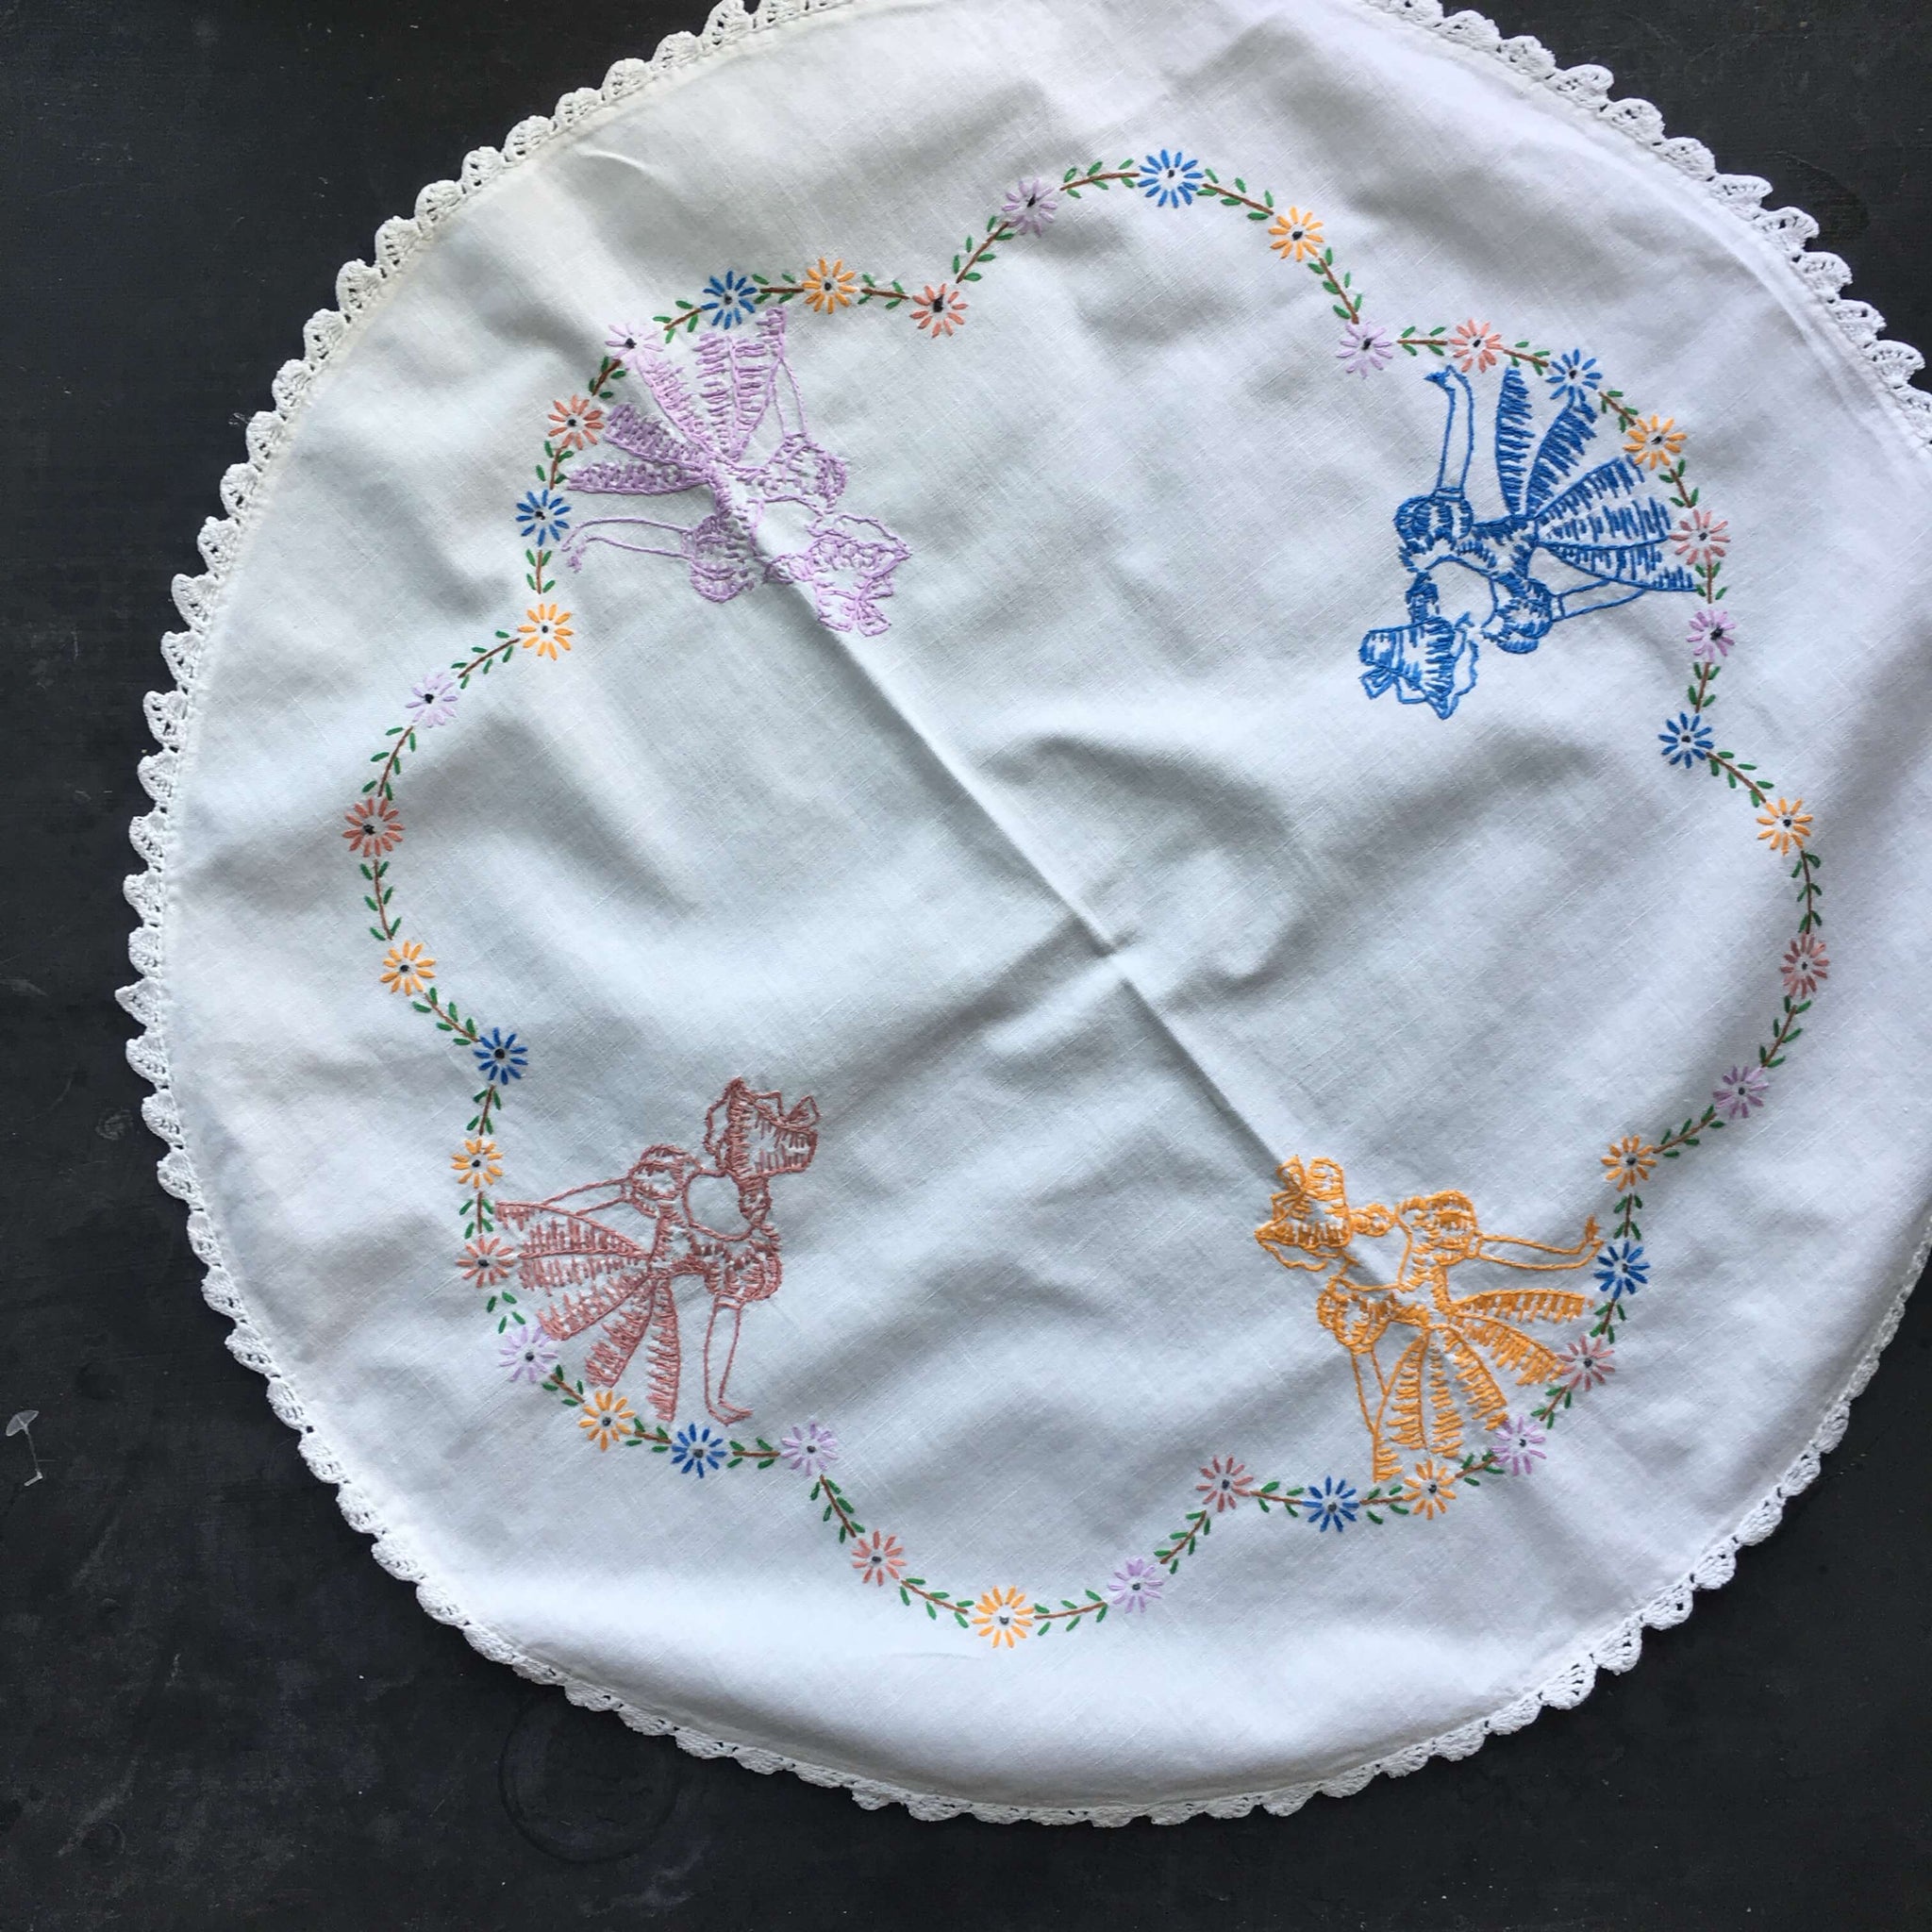 Vintage Round Embroidered Table Top Linen - Four Girls in Bonnets Floral Design with Crocheted Edge